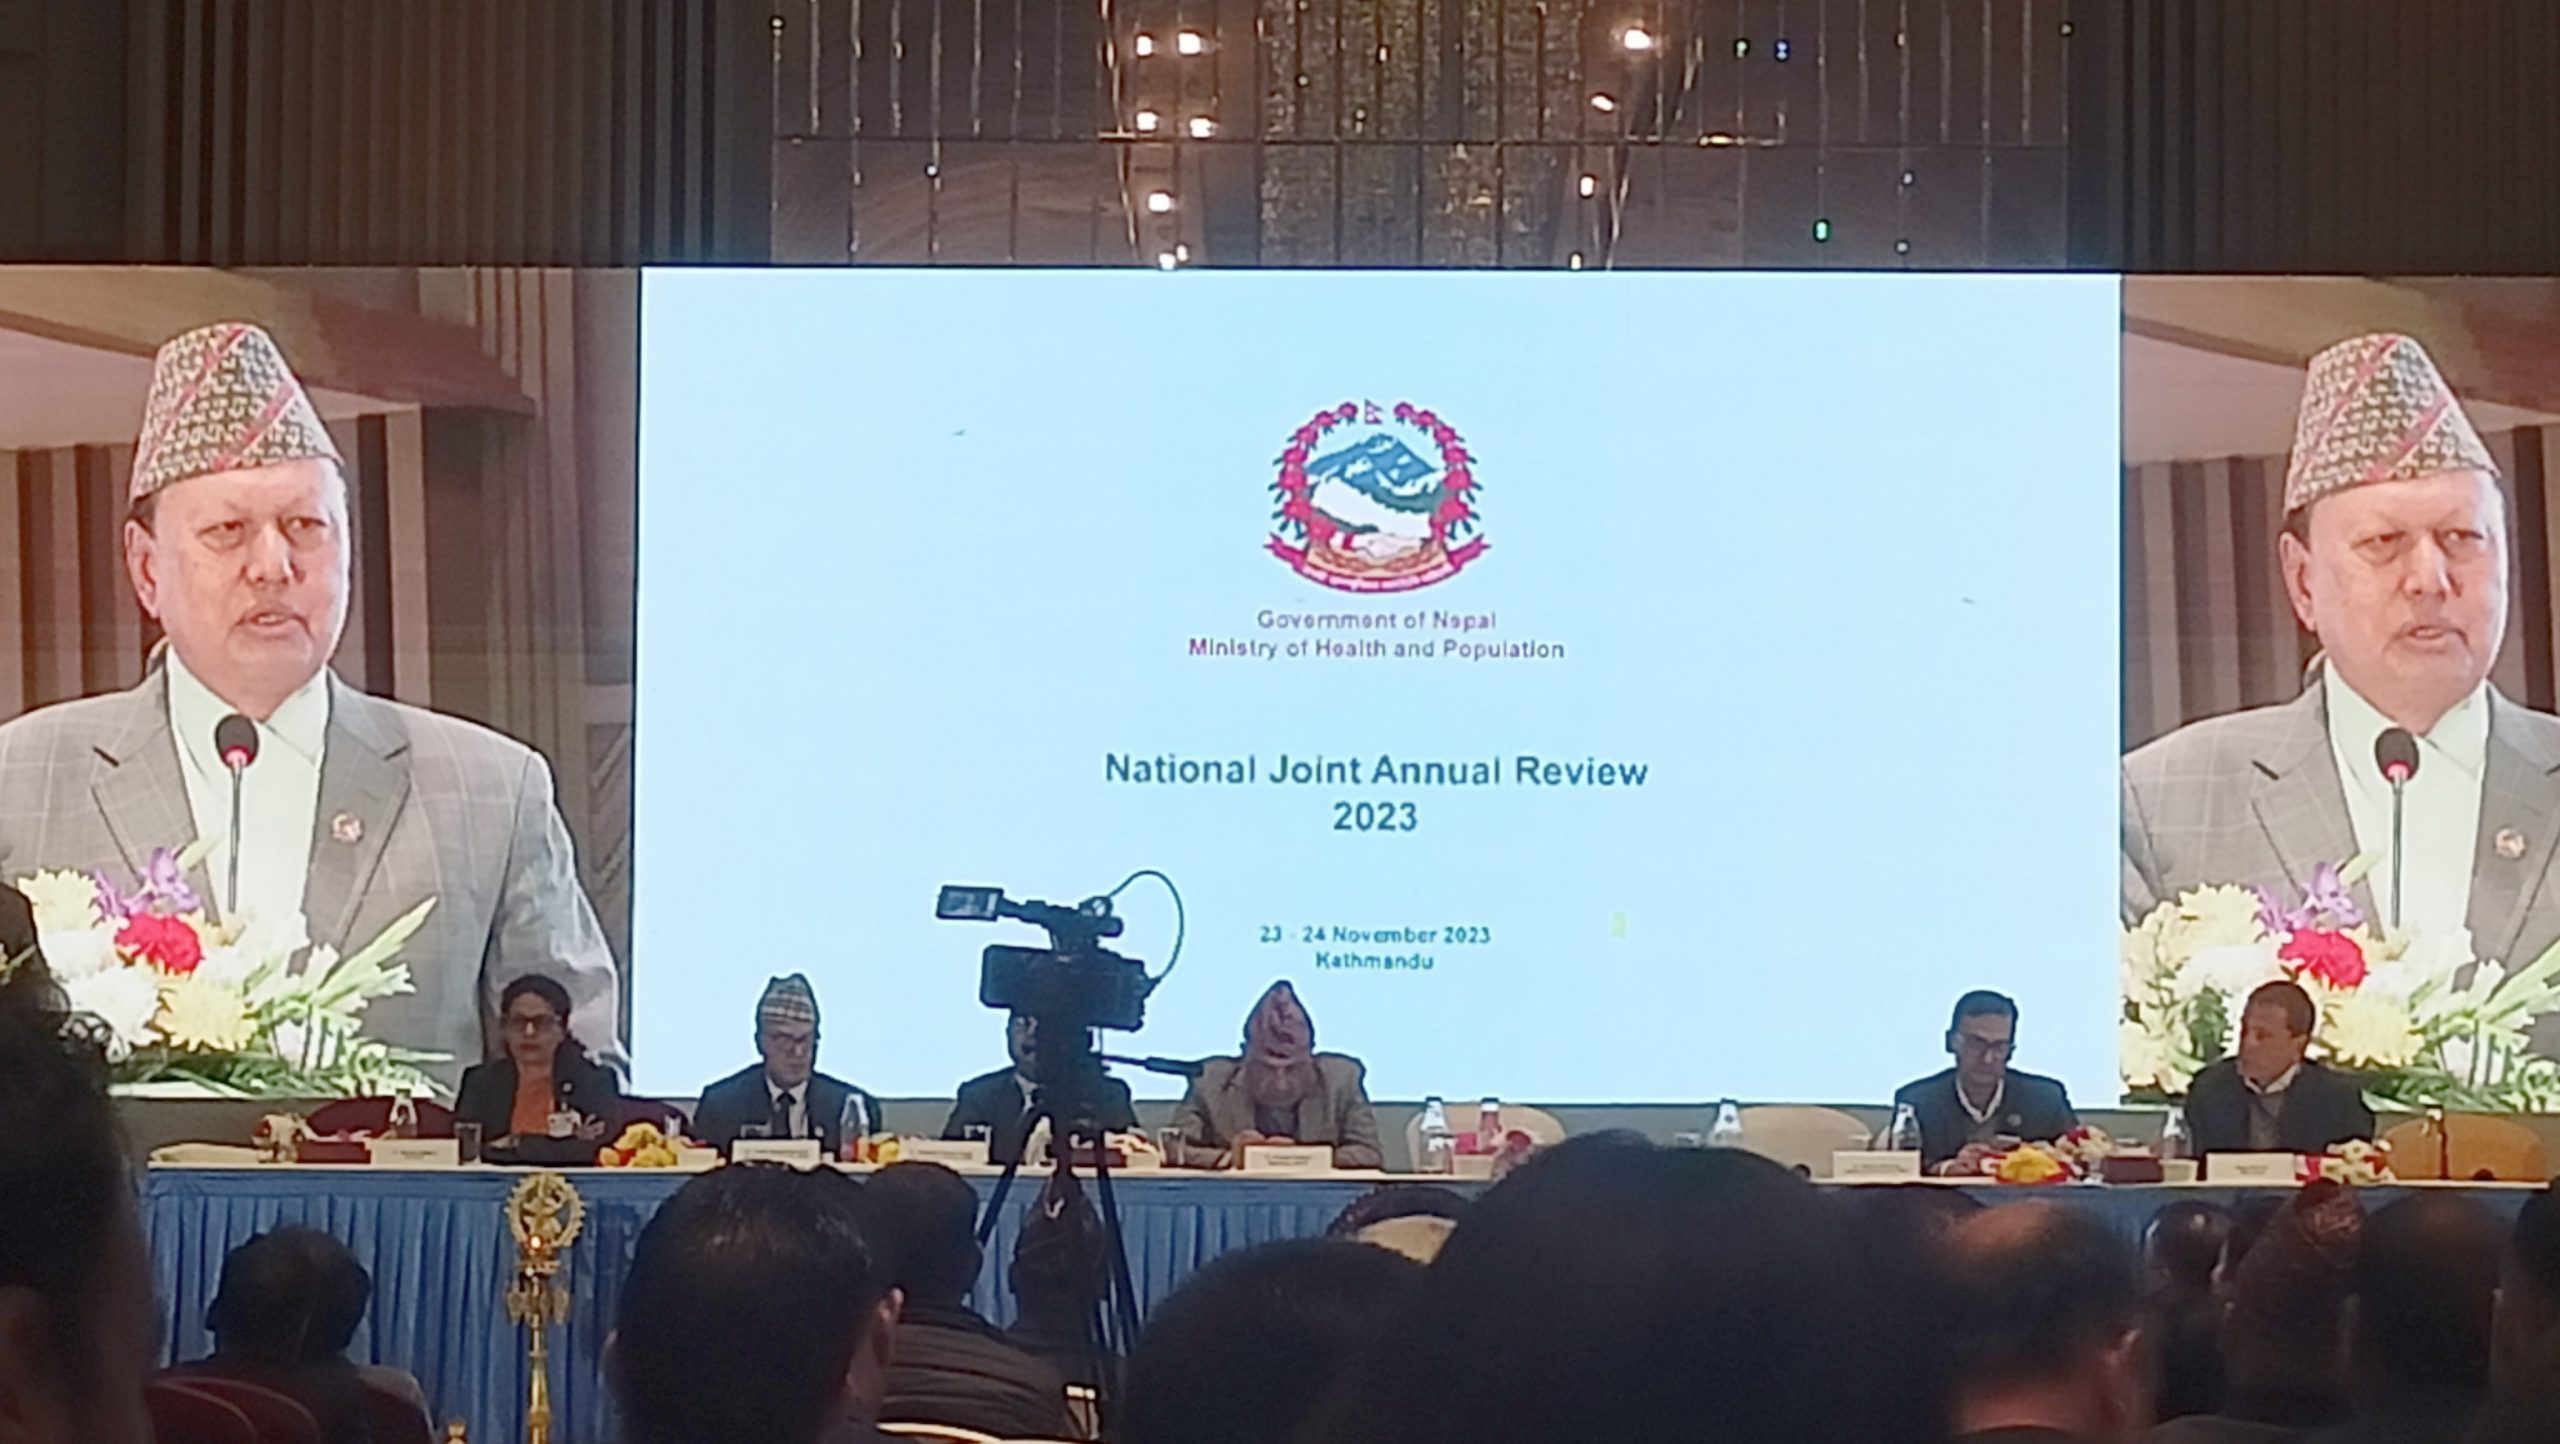 Rt. Honourable Mr. Mohan Bahadur Basnet, Minister (Health & Pop.) at National Joint Annual Review 2023